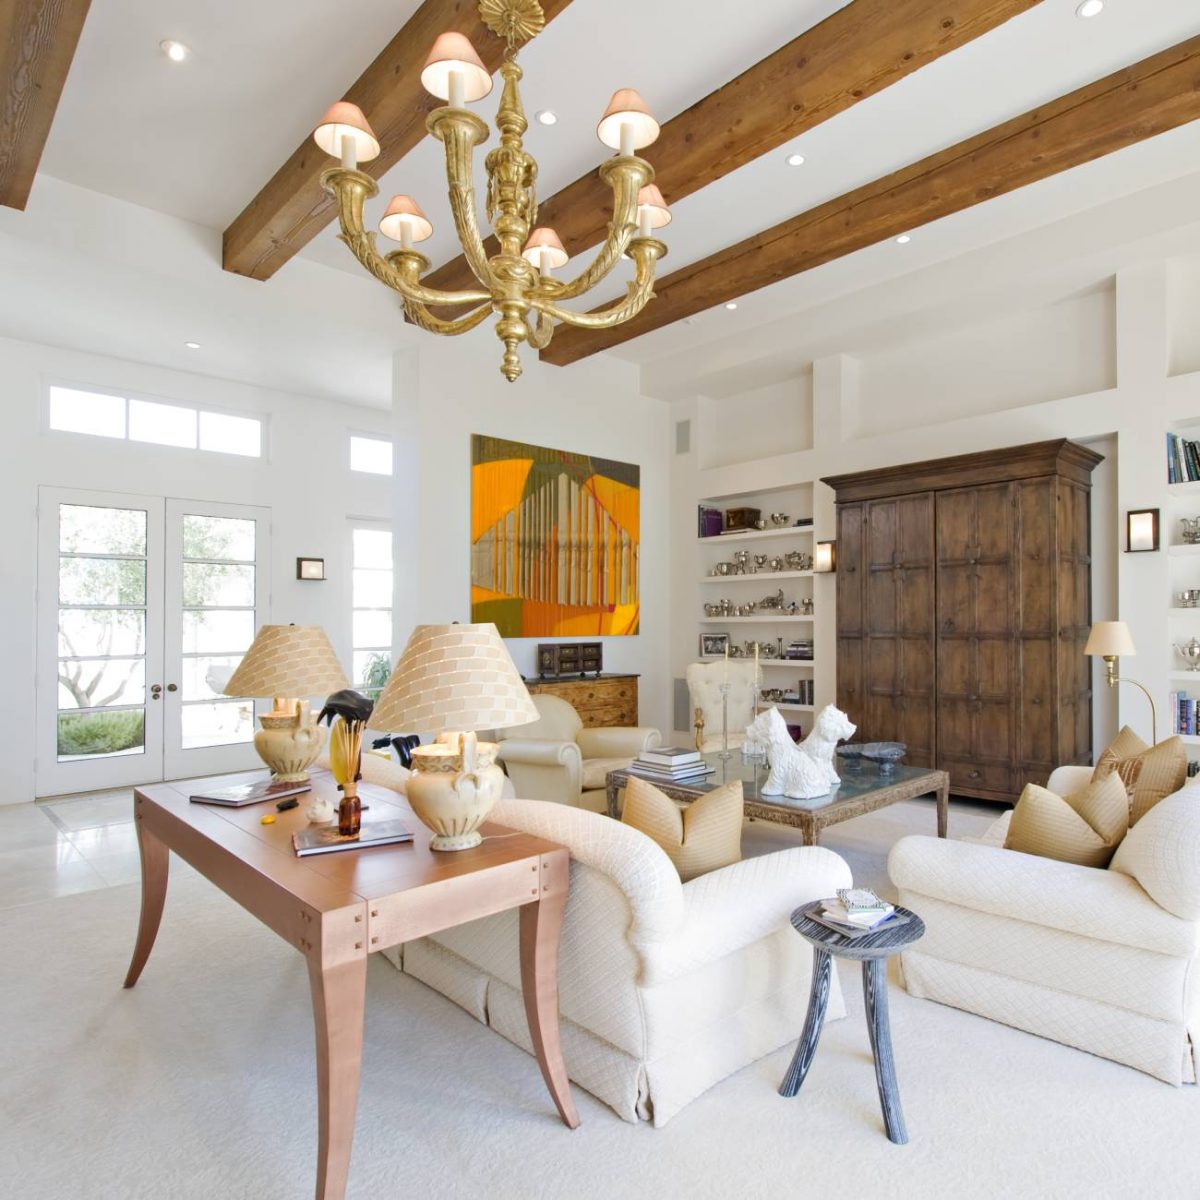 large modern living room with white walls and wooden ceiling beams with a chandelier